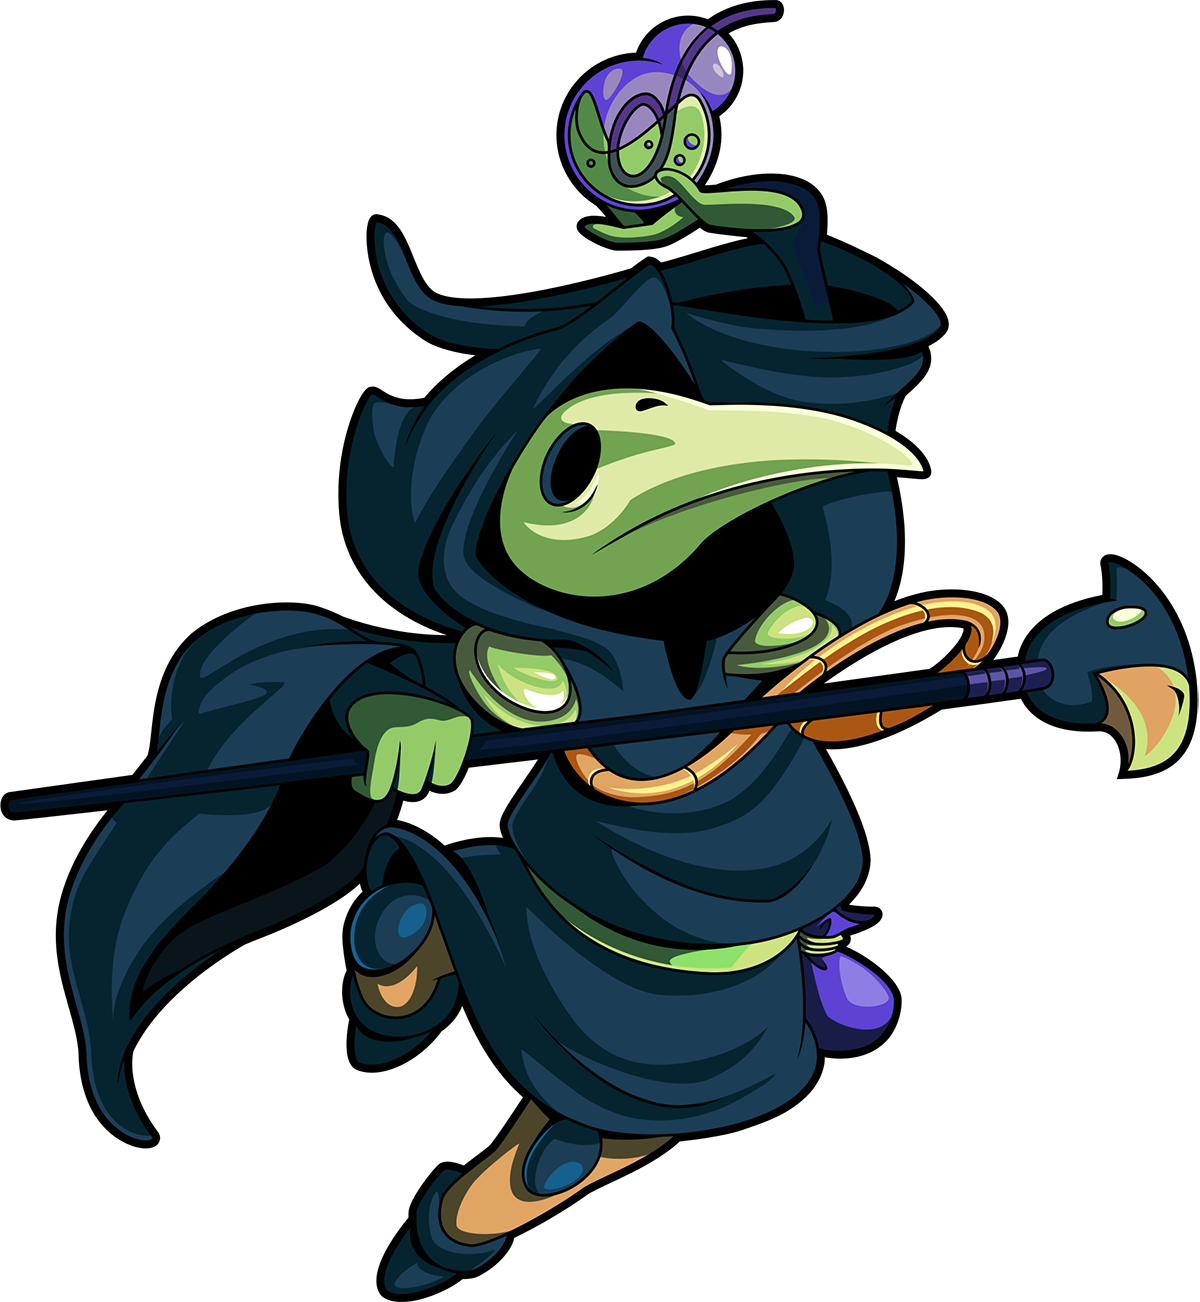 Plague Knight is one of eight Knights of "The Order of no Quarter&...